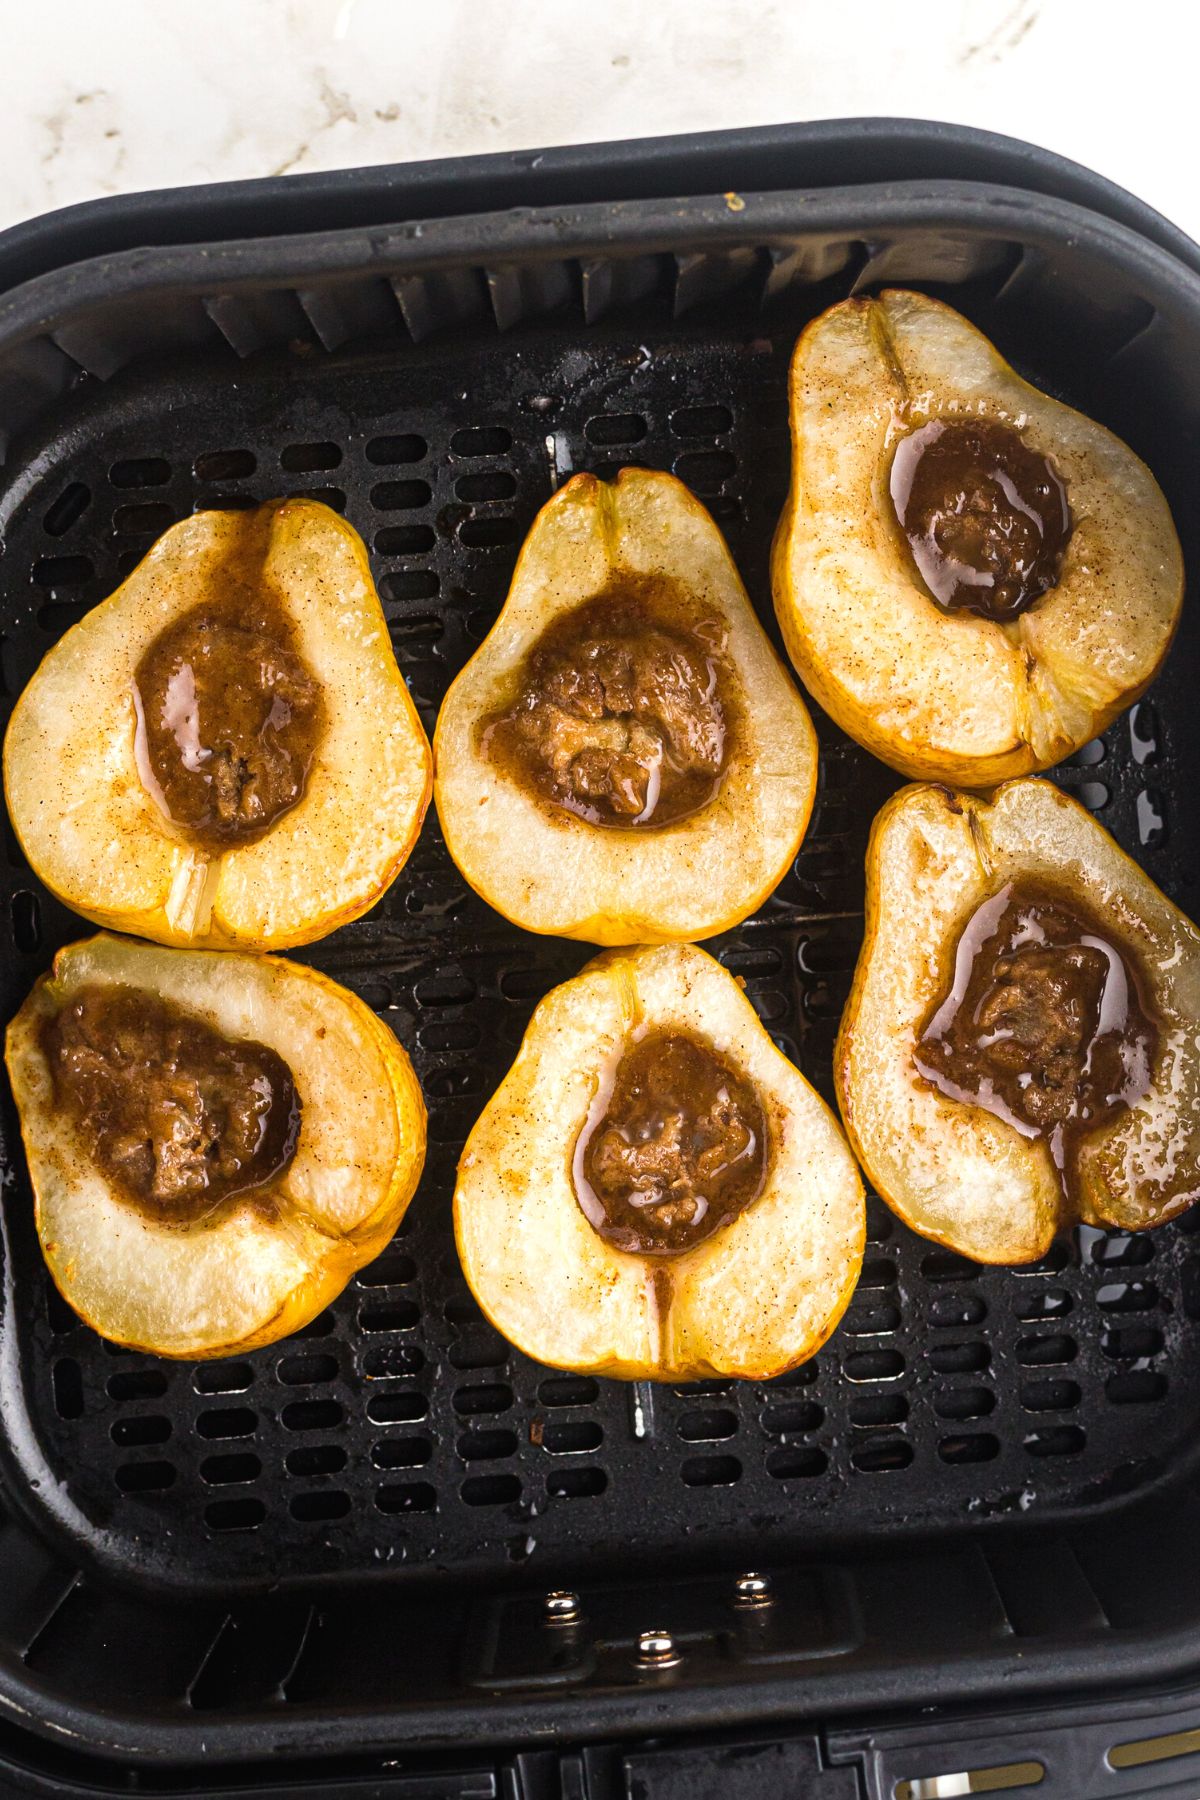 Pears turned face up in the air fryer basket